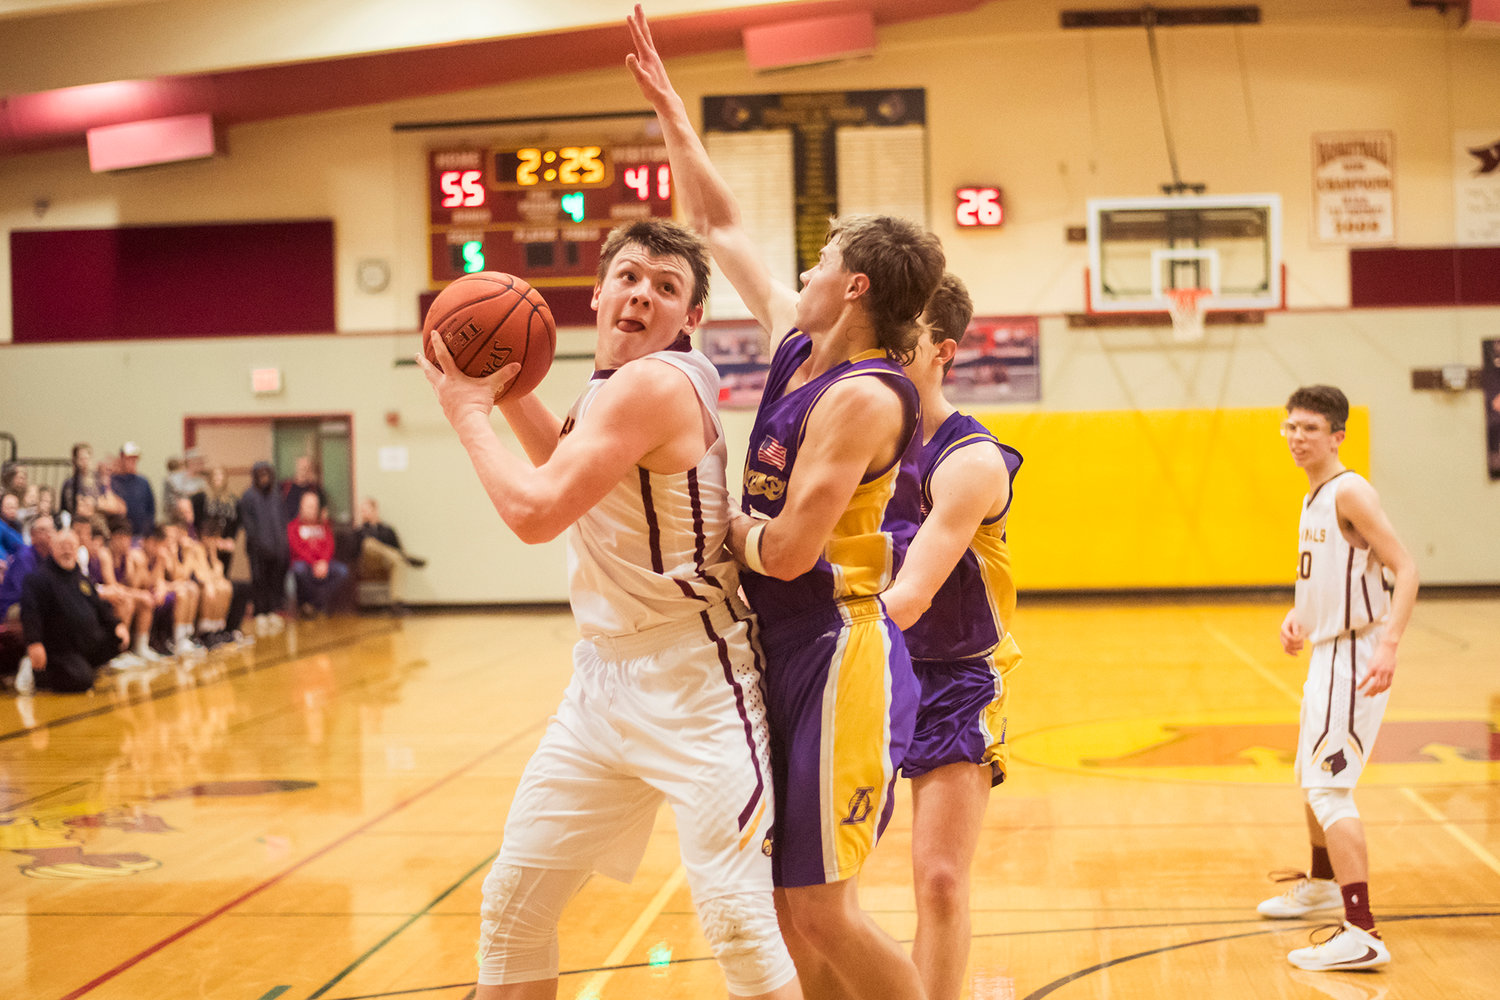 Cardinal's Nolan Swofford (31) looks to the basket before driving in Wednesday night at Winlock High School.